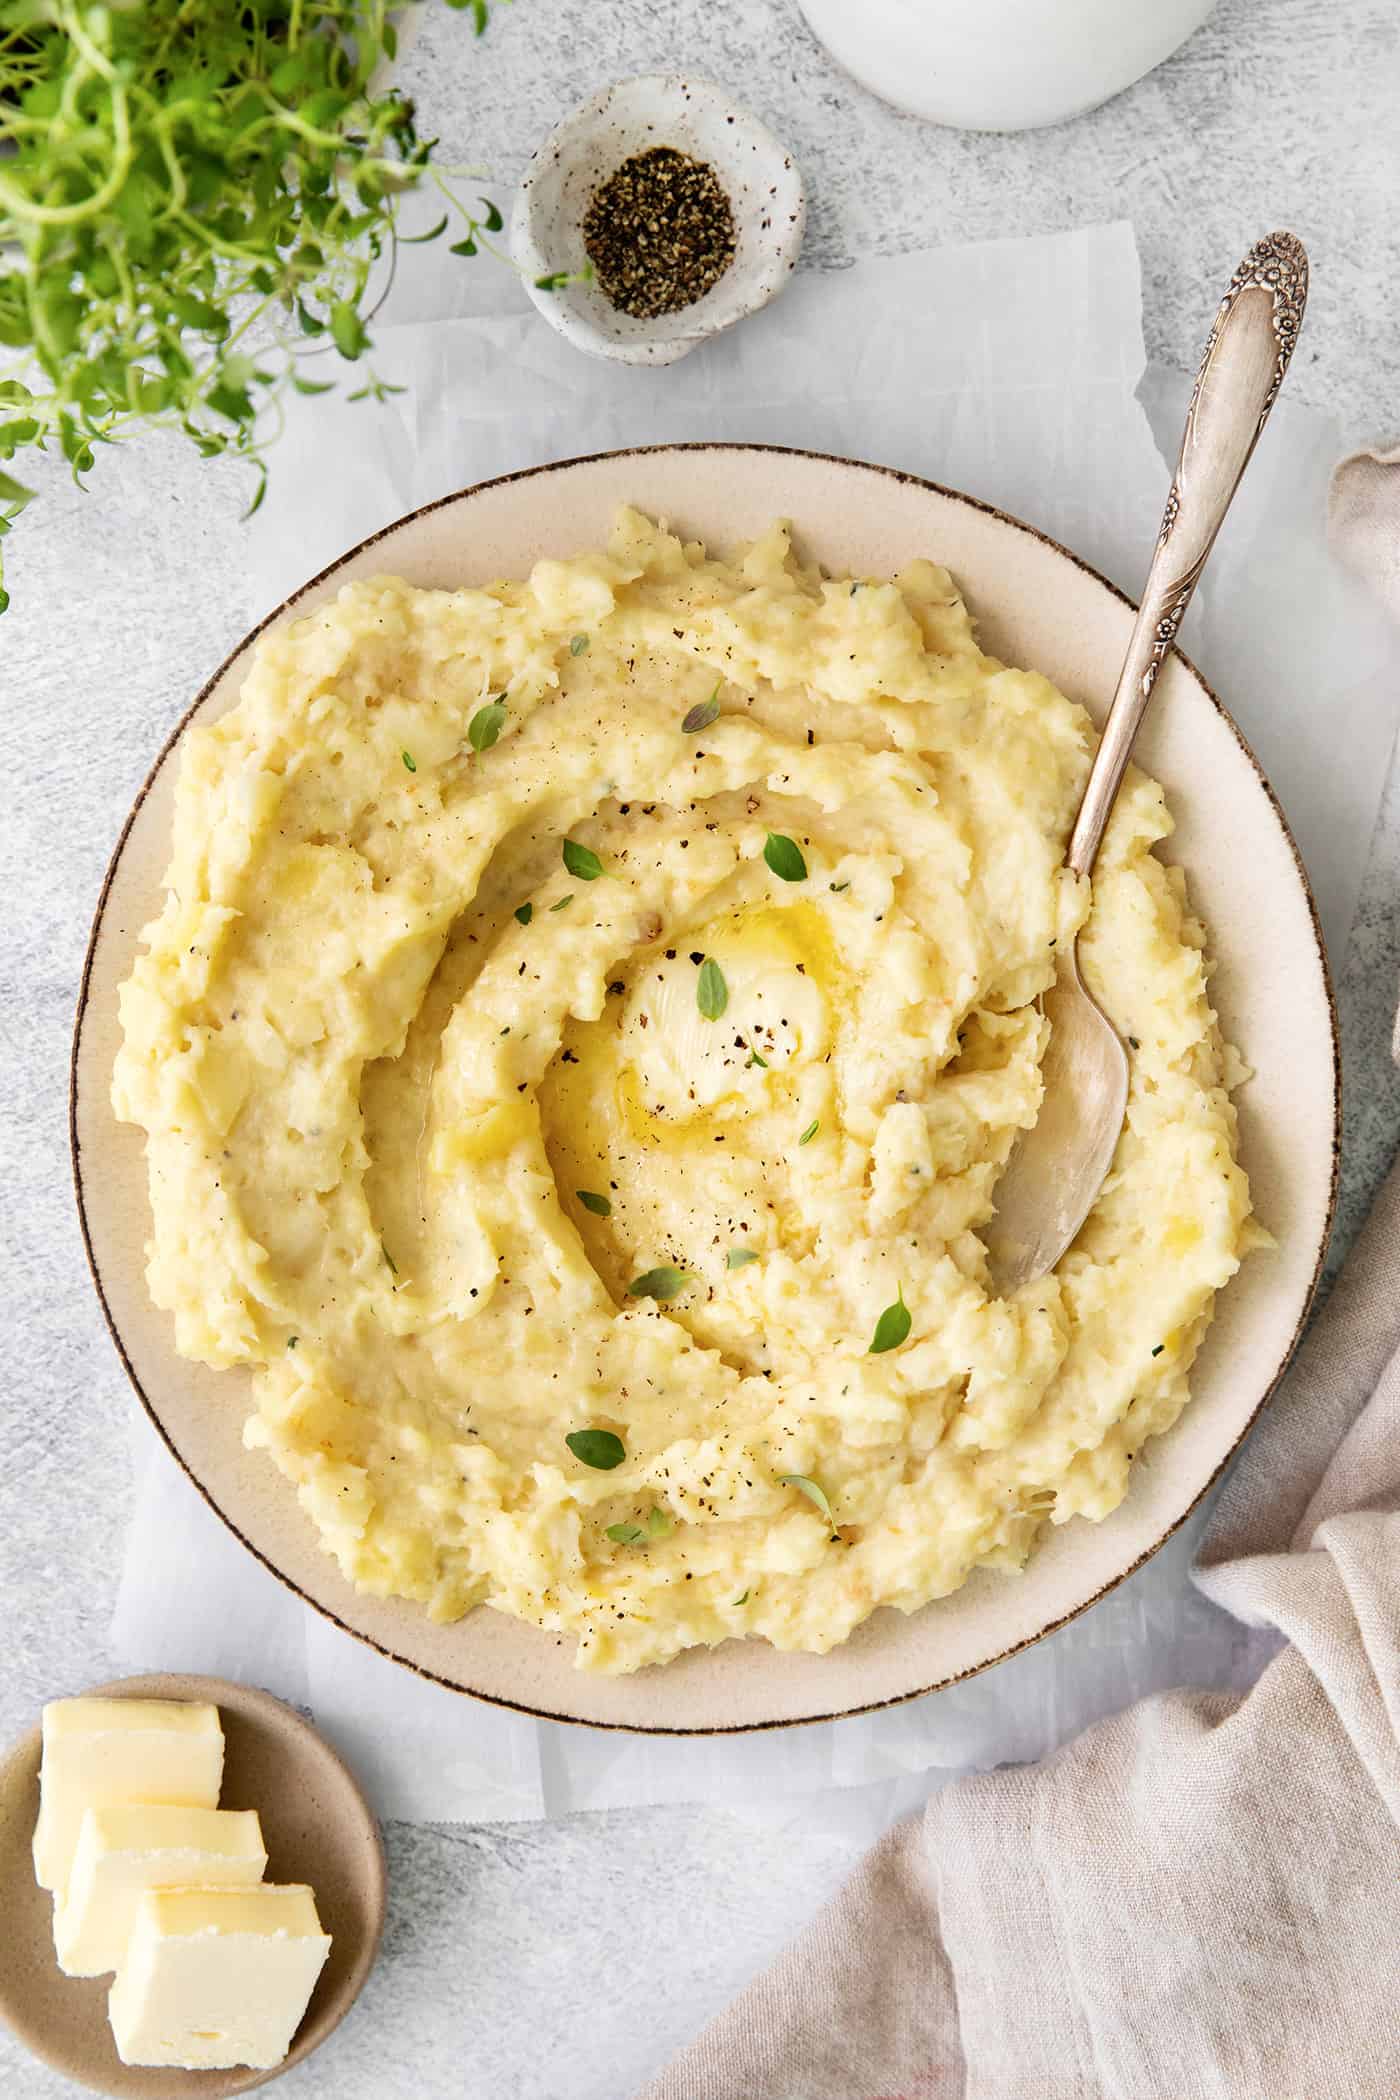 a big bowl of mashed parsnips with melty butter